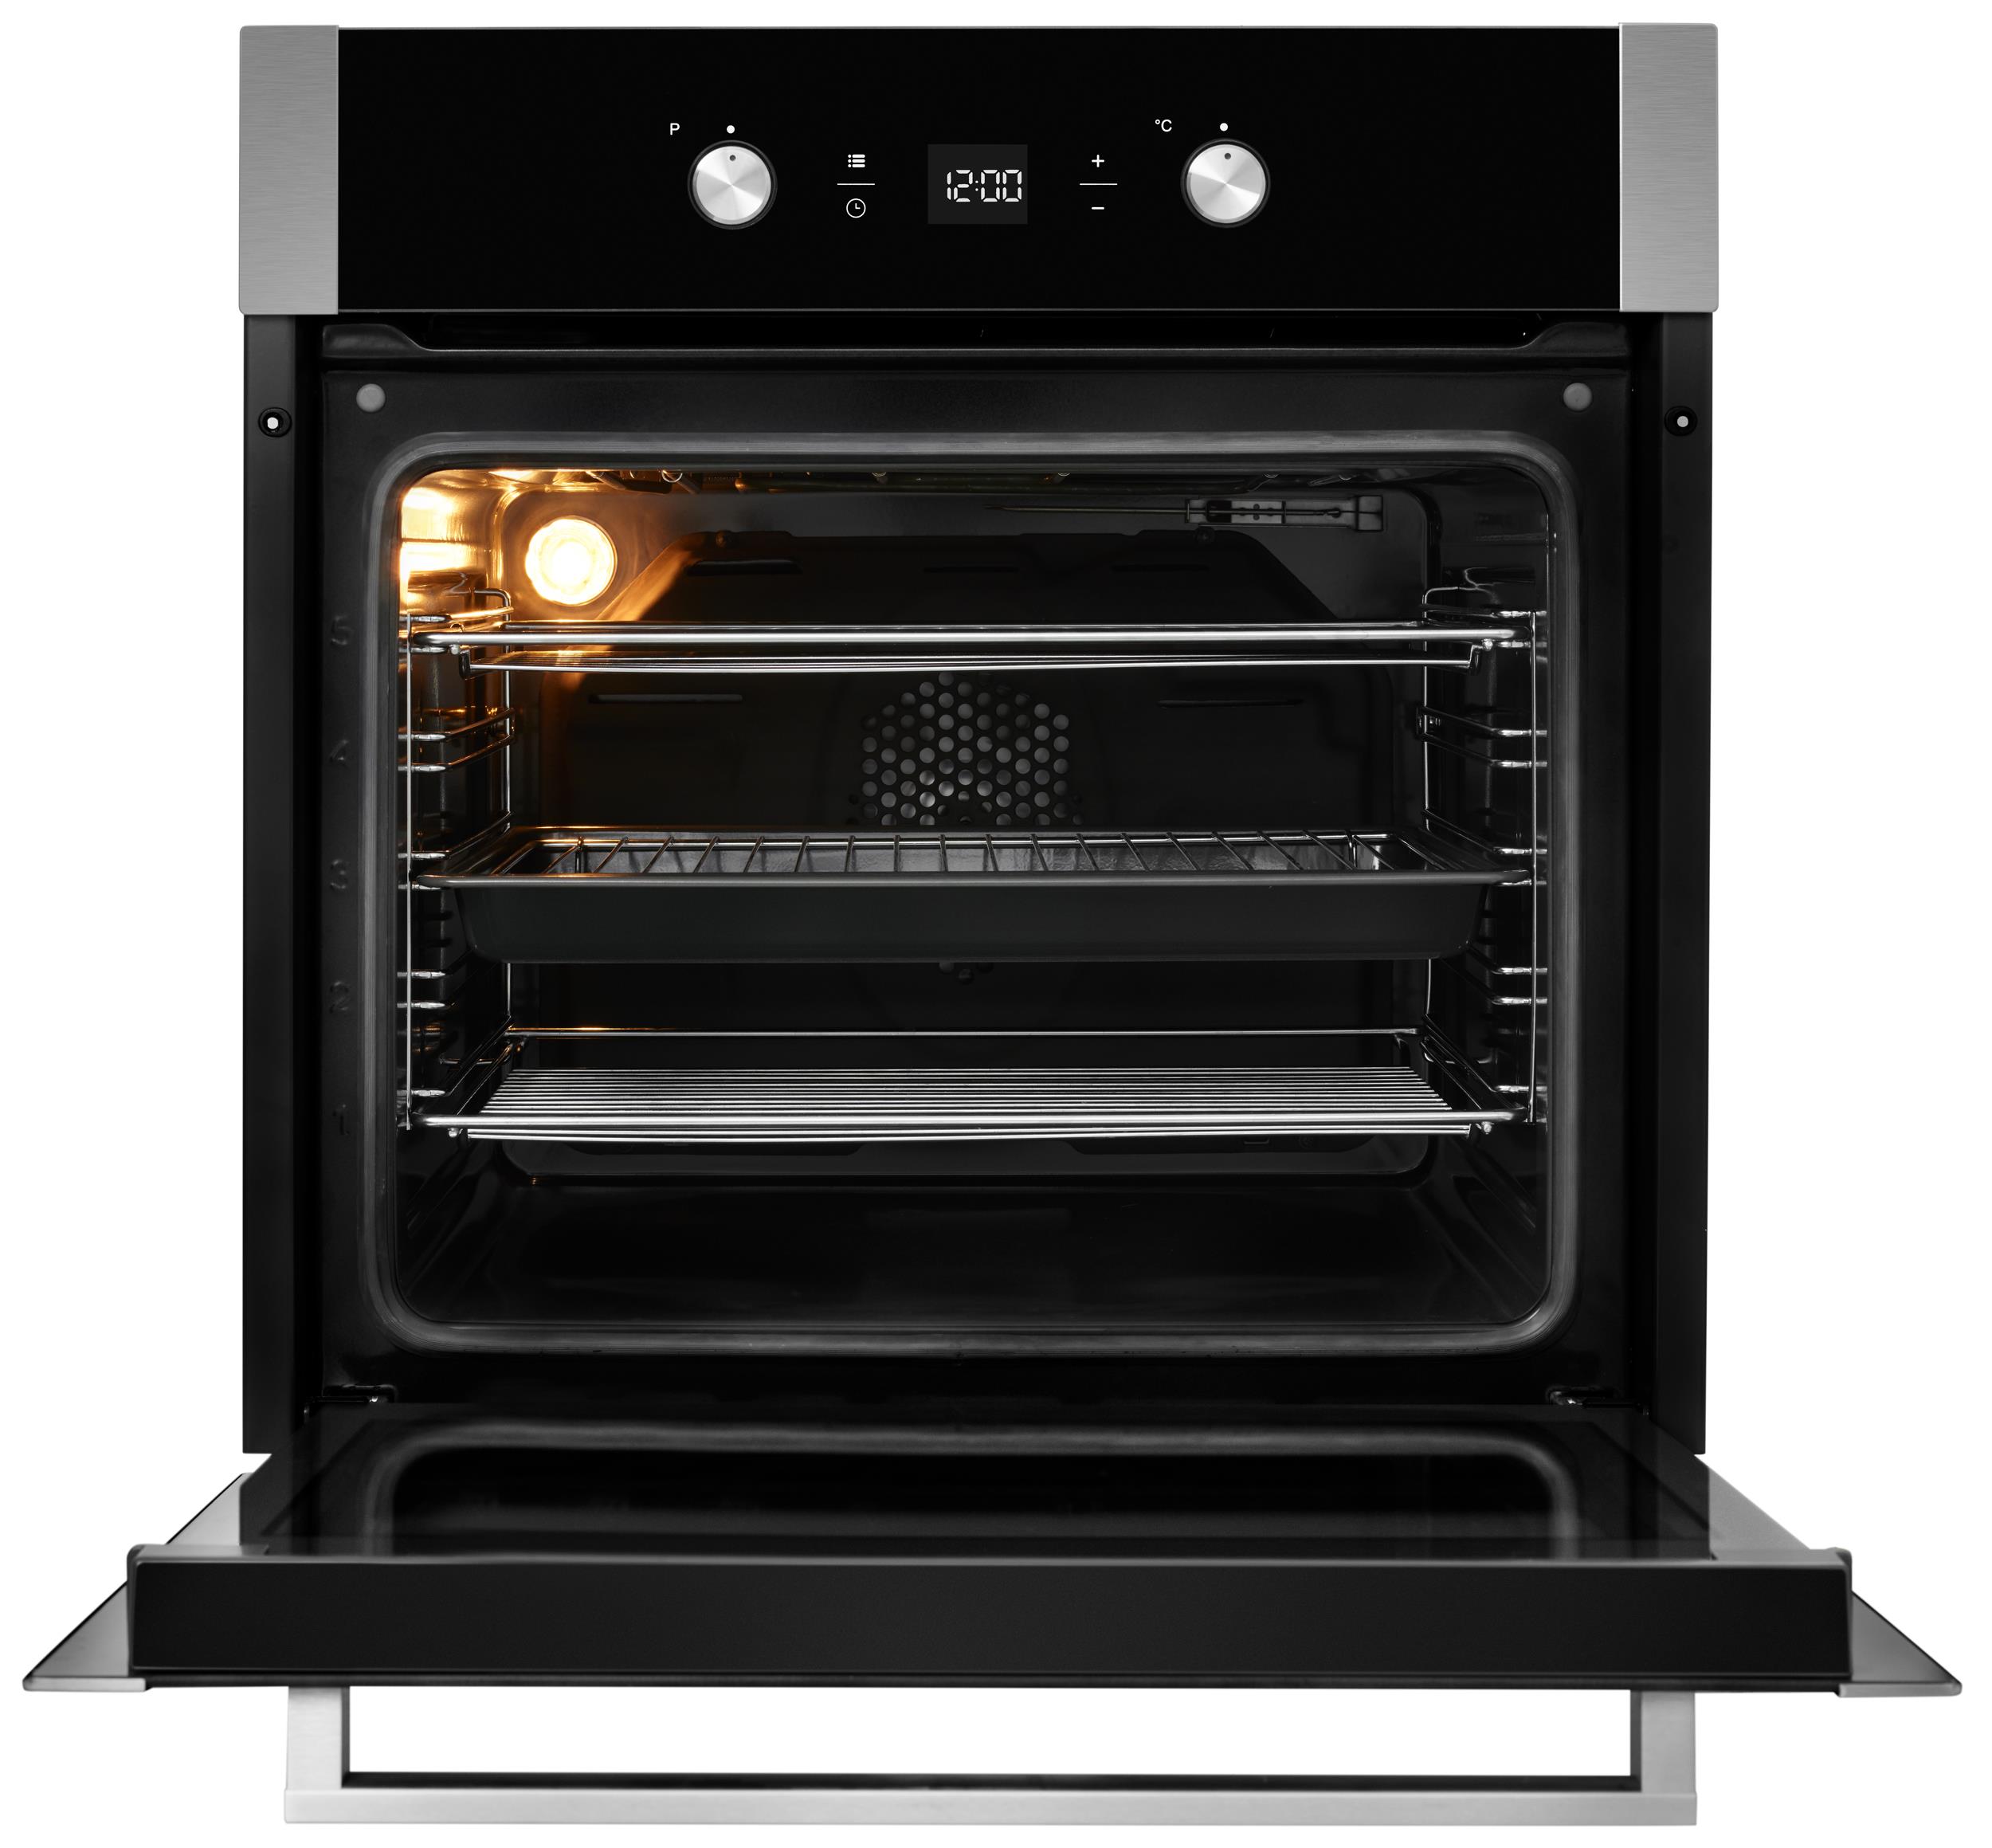 blomberg single oven reviews)